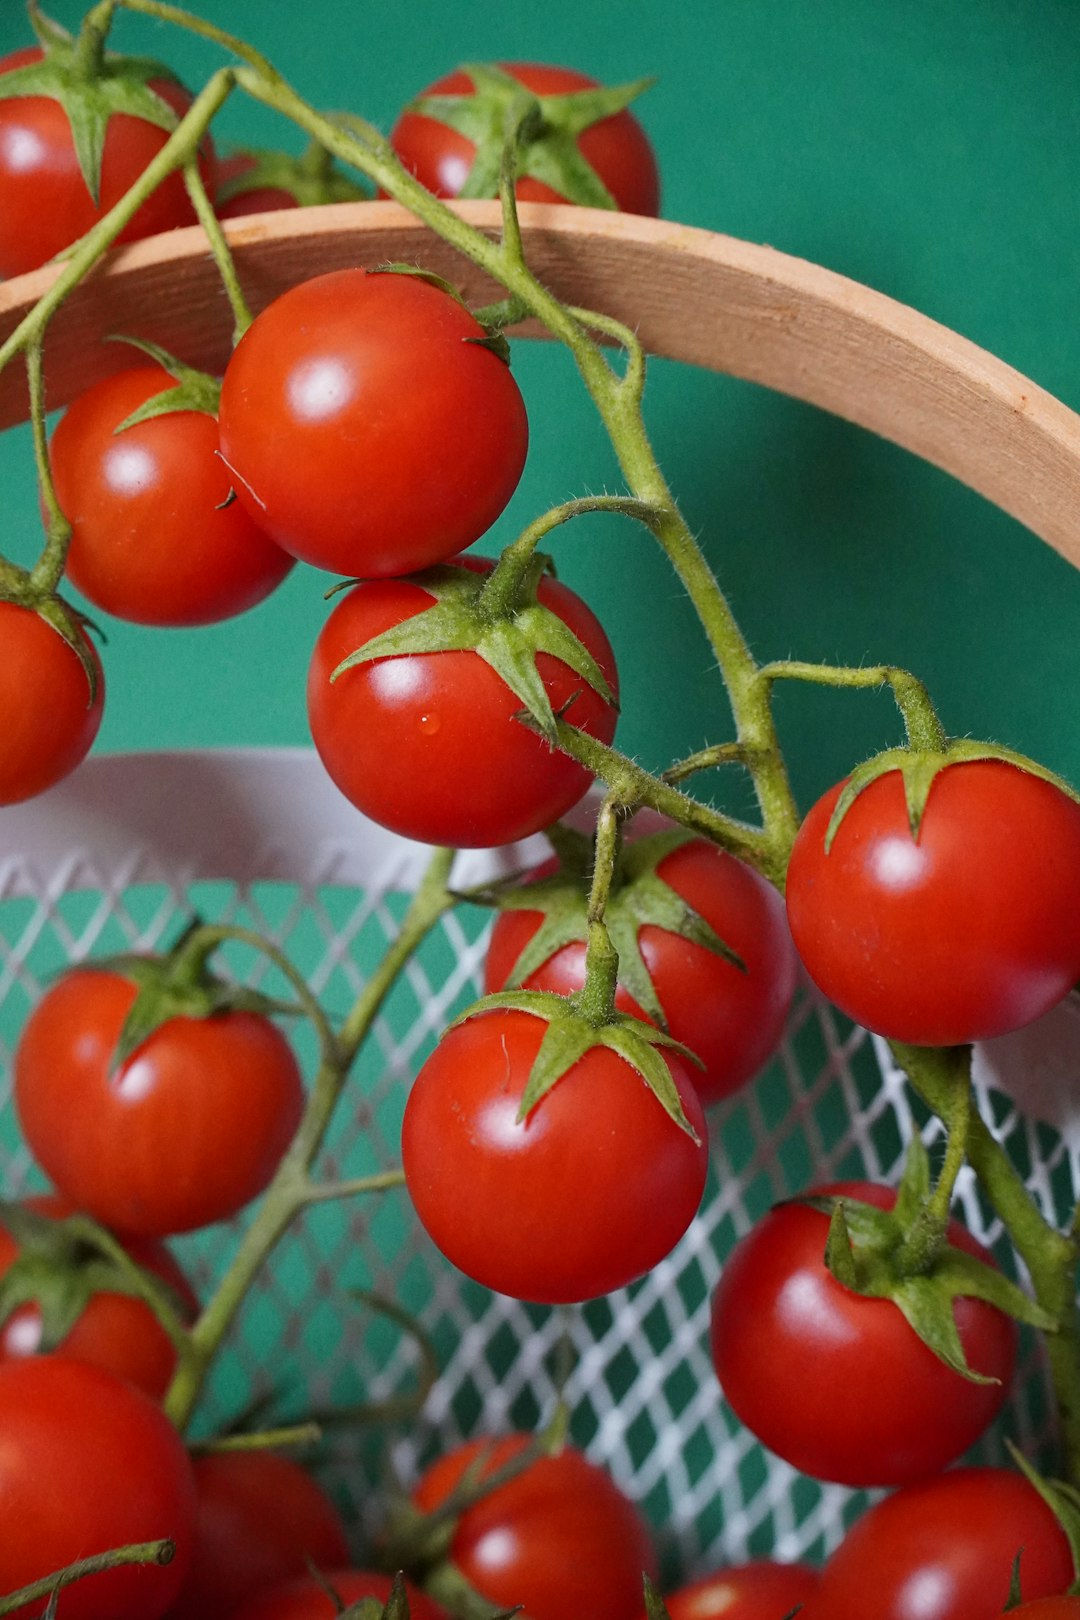 How To Grow A Tomato Plant That Bears Tomatoes - cherry tomatoes on vine
